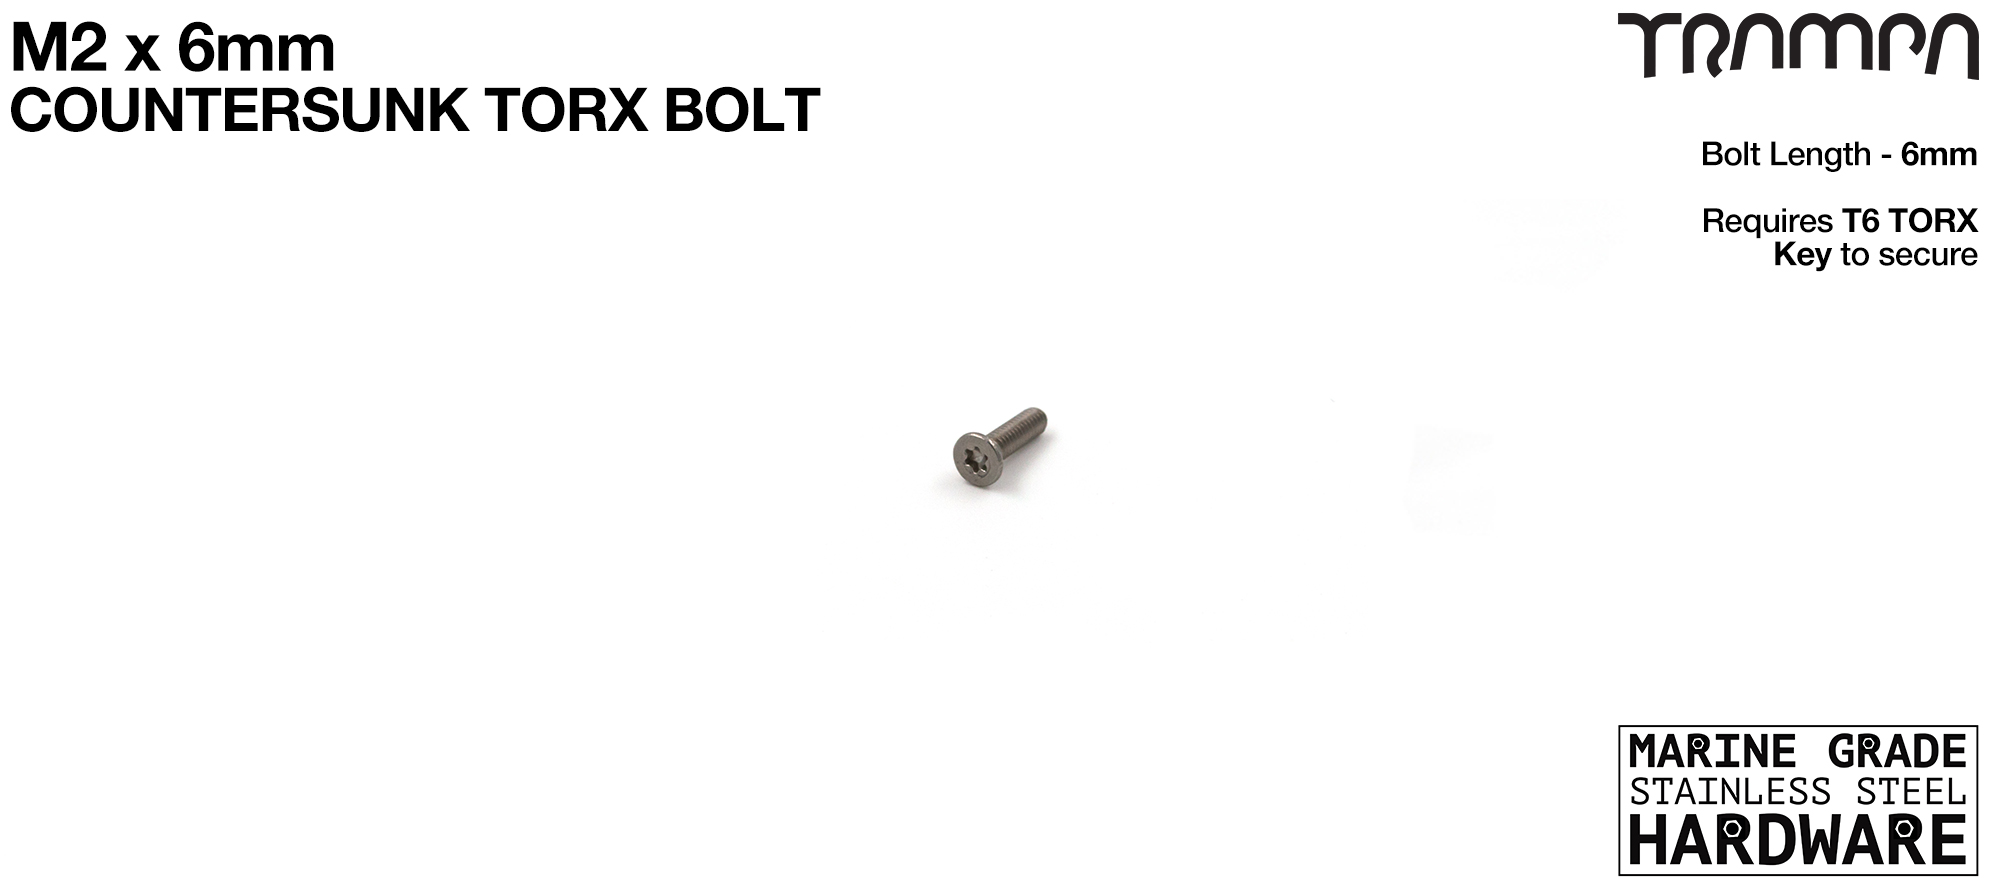 M2 x 6mm TORX Countersunk Bolt - Marine Grade Stainless steel with TORX Fitting